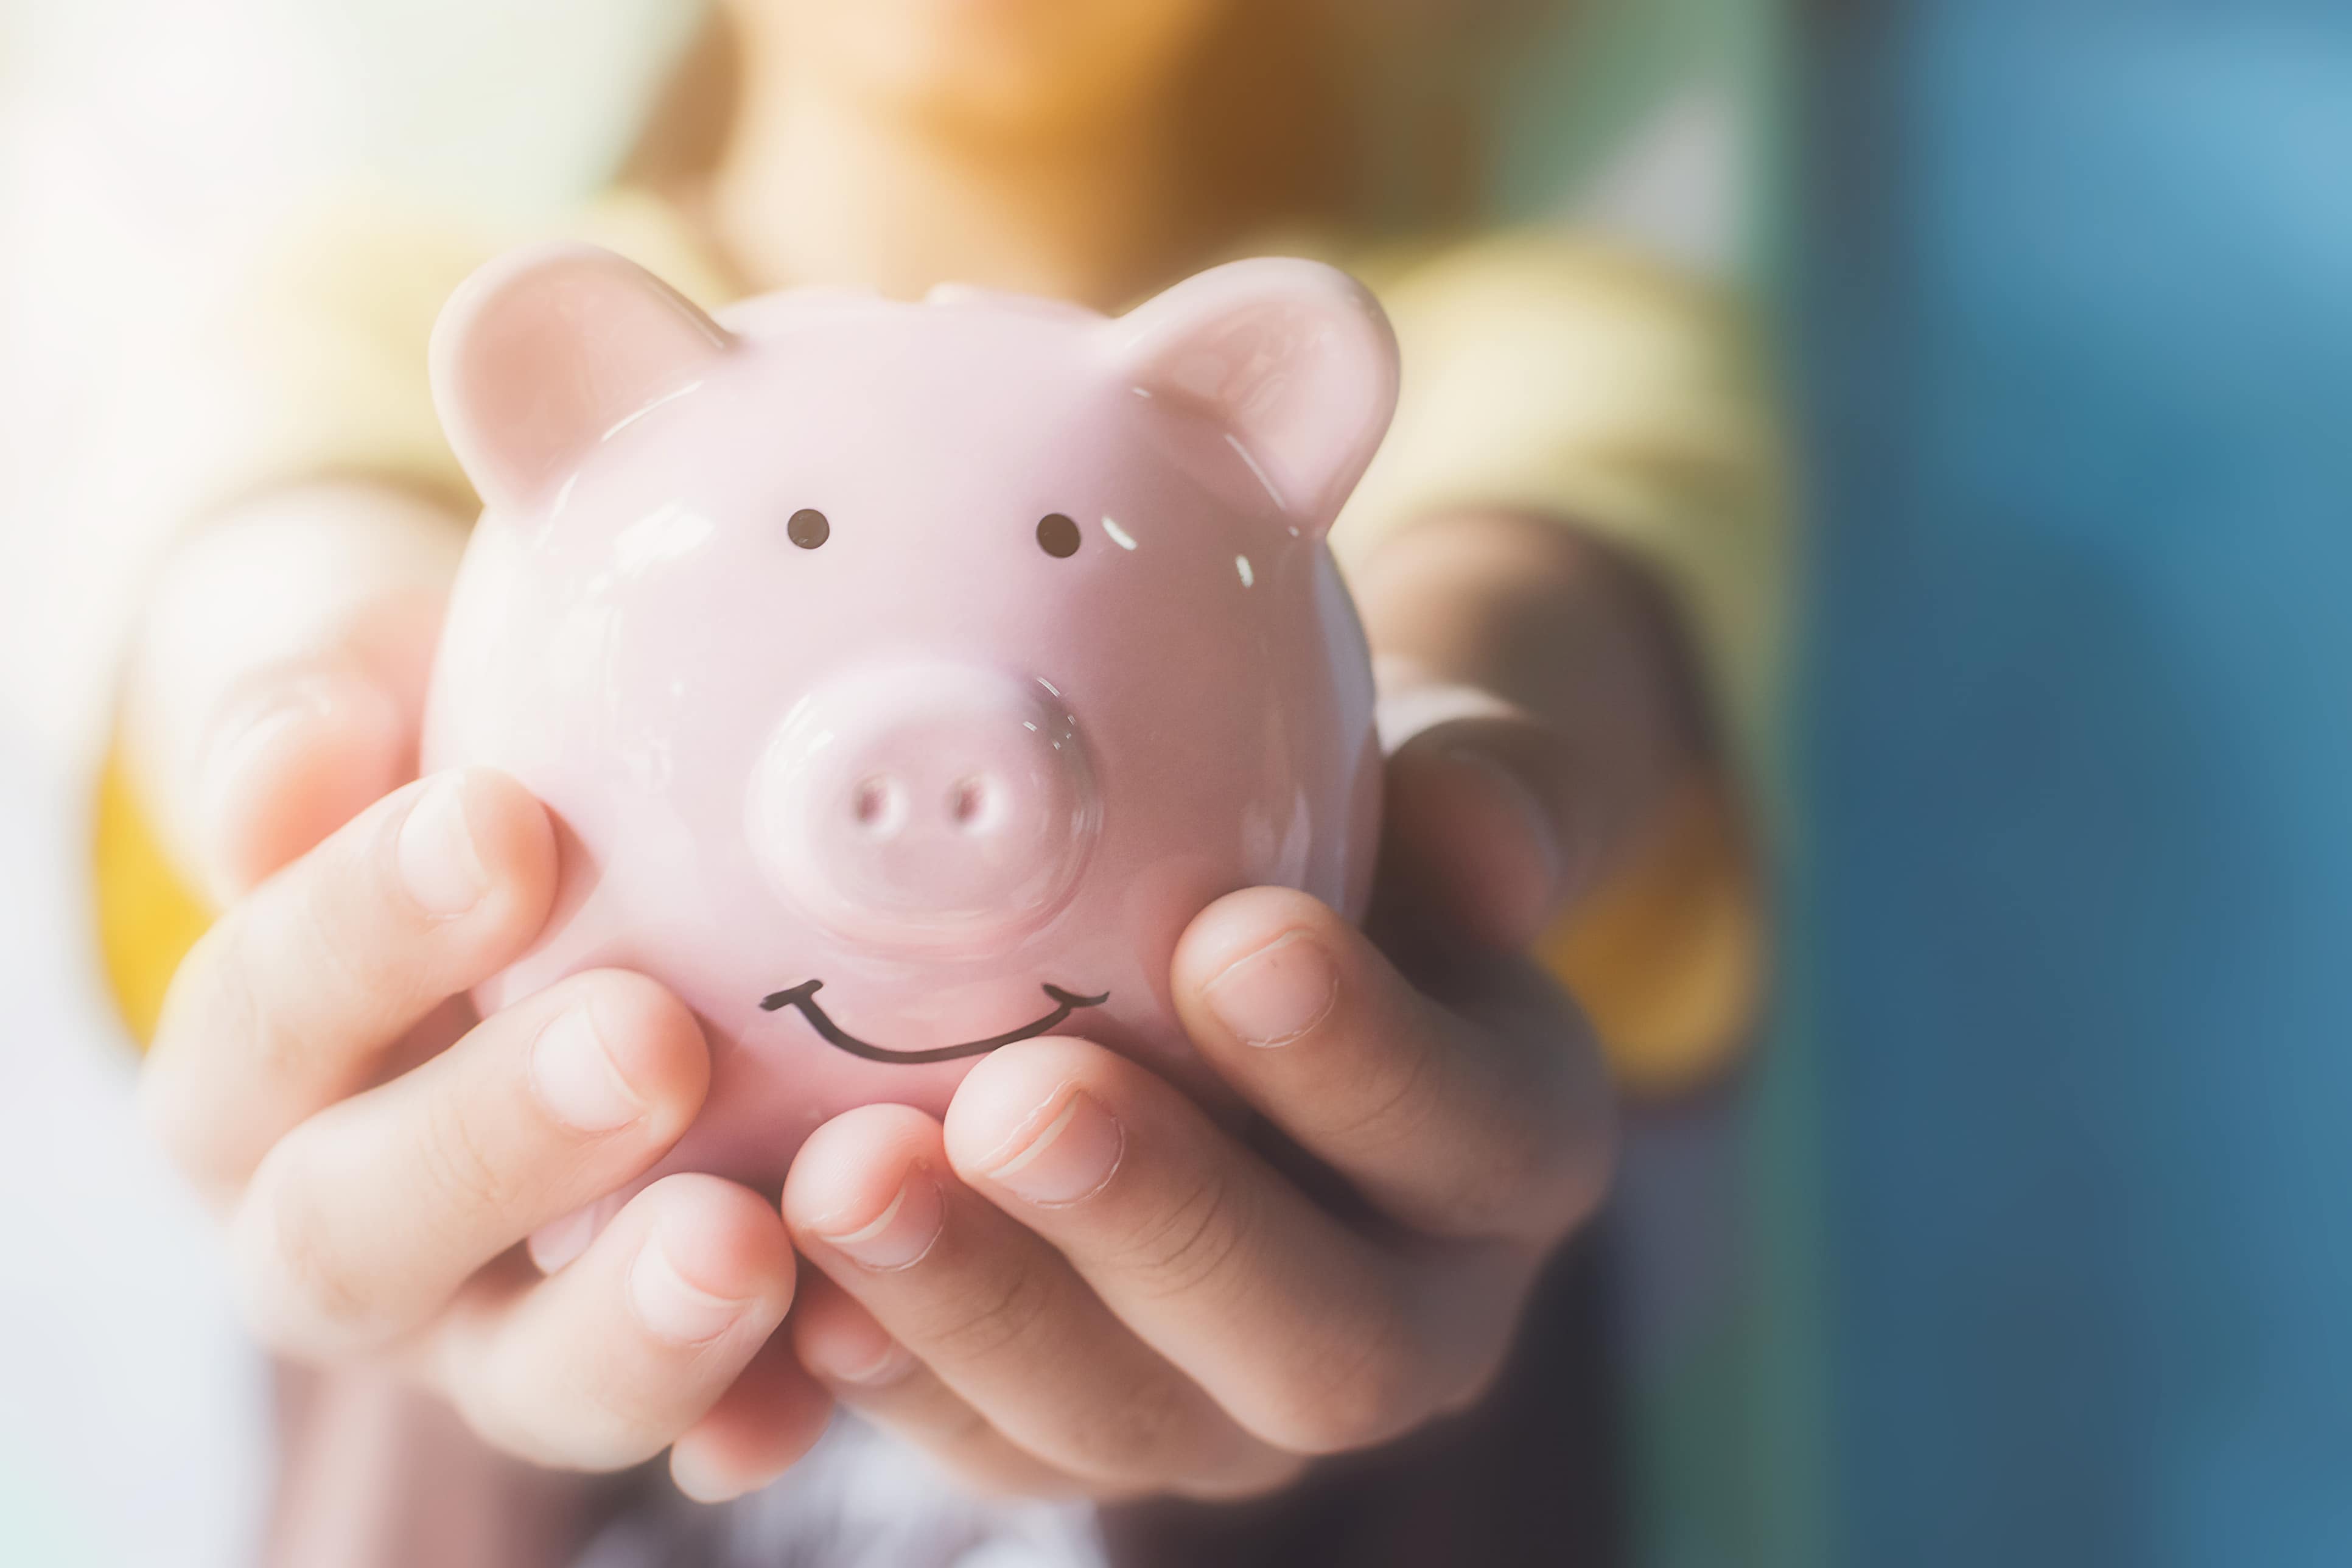 Woman holding a piggy bank symbolizing the positive aspect of chapter 7 bankruptcy.